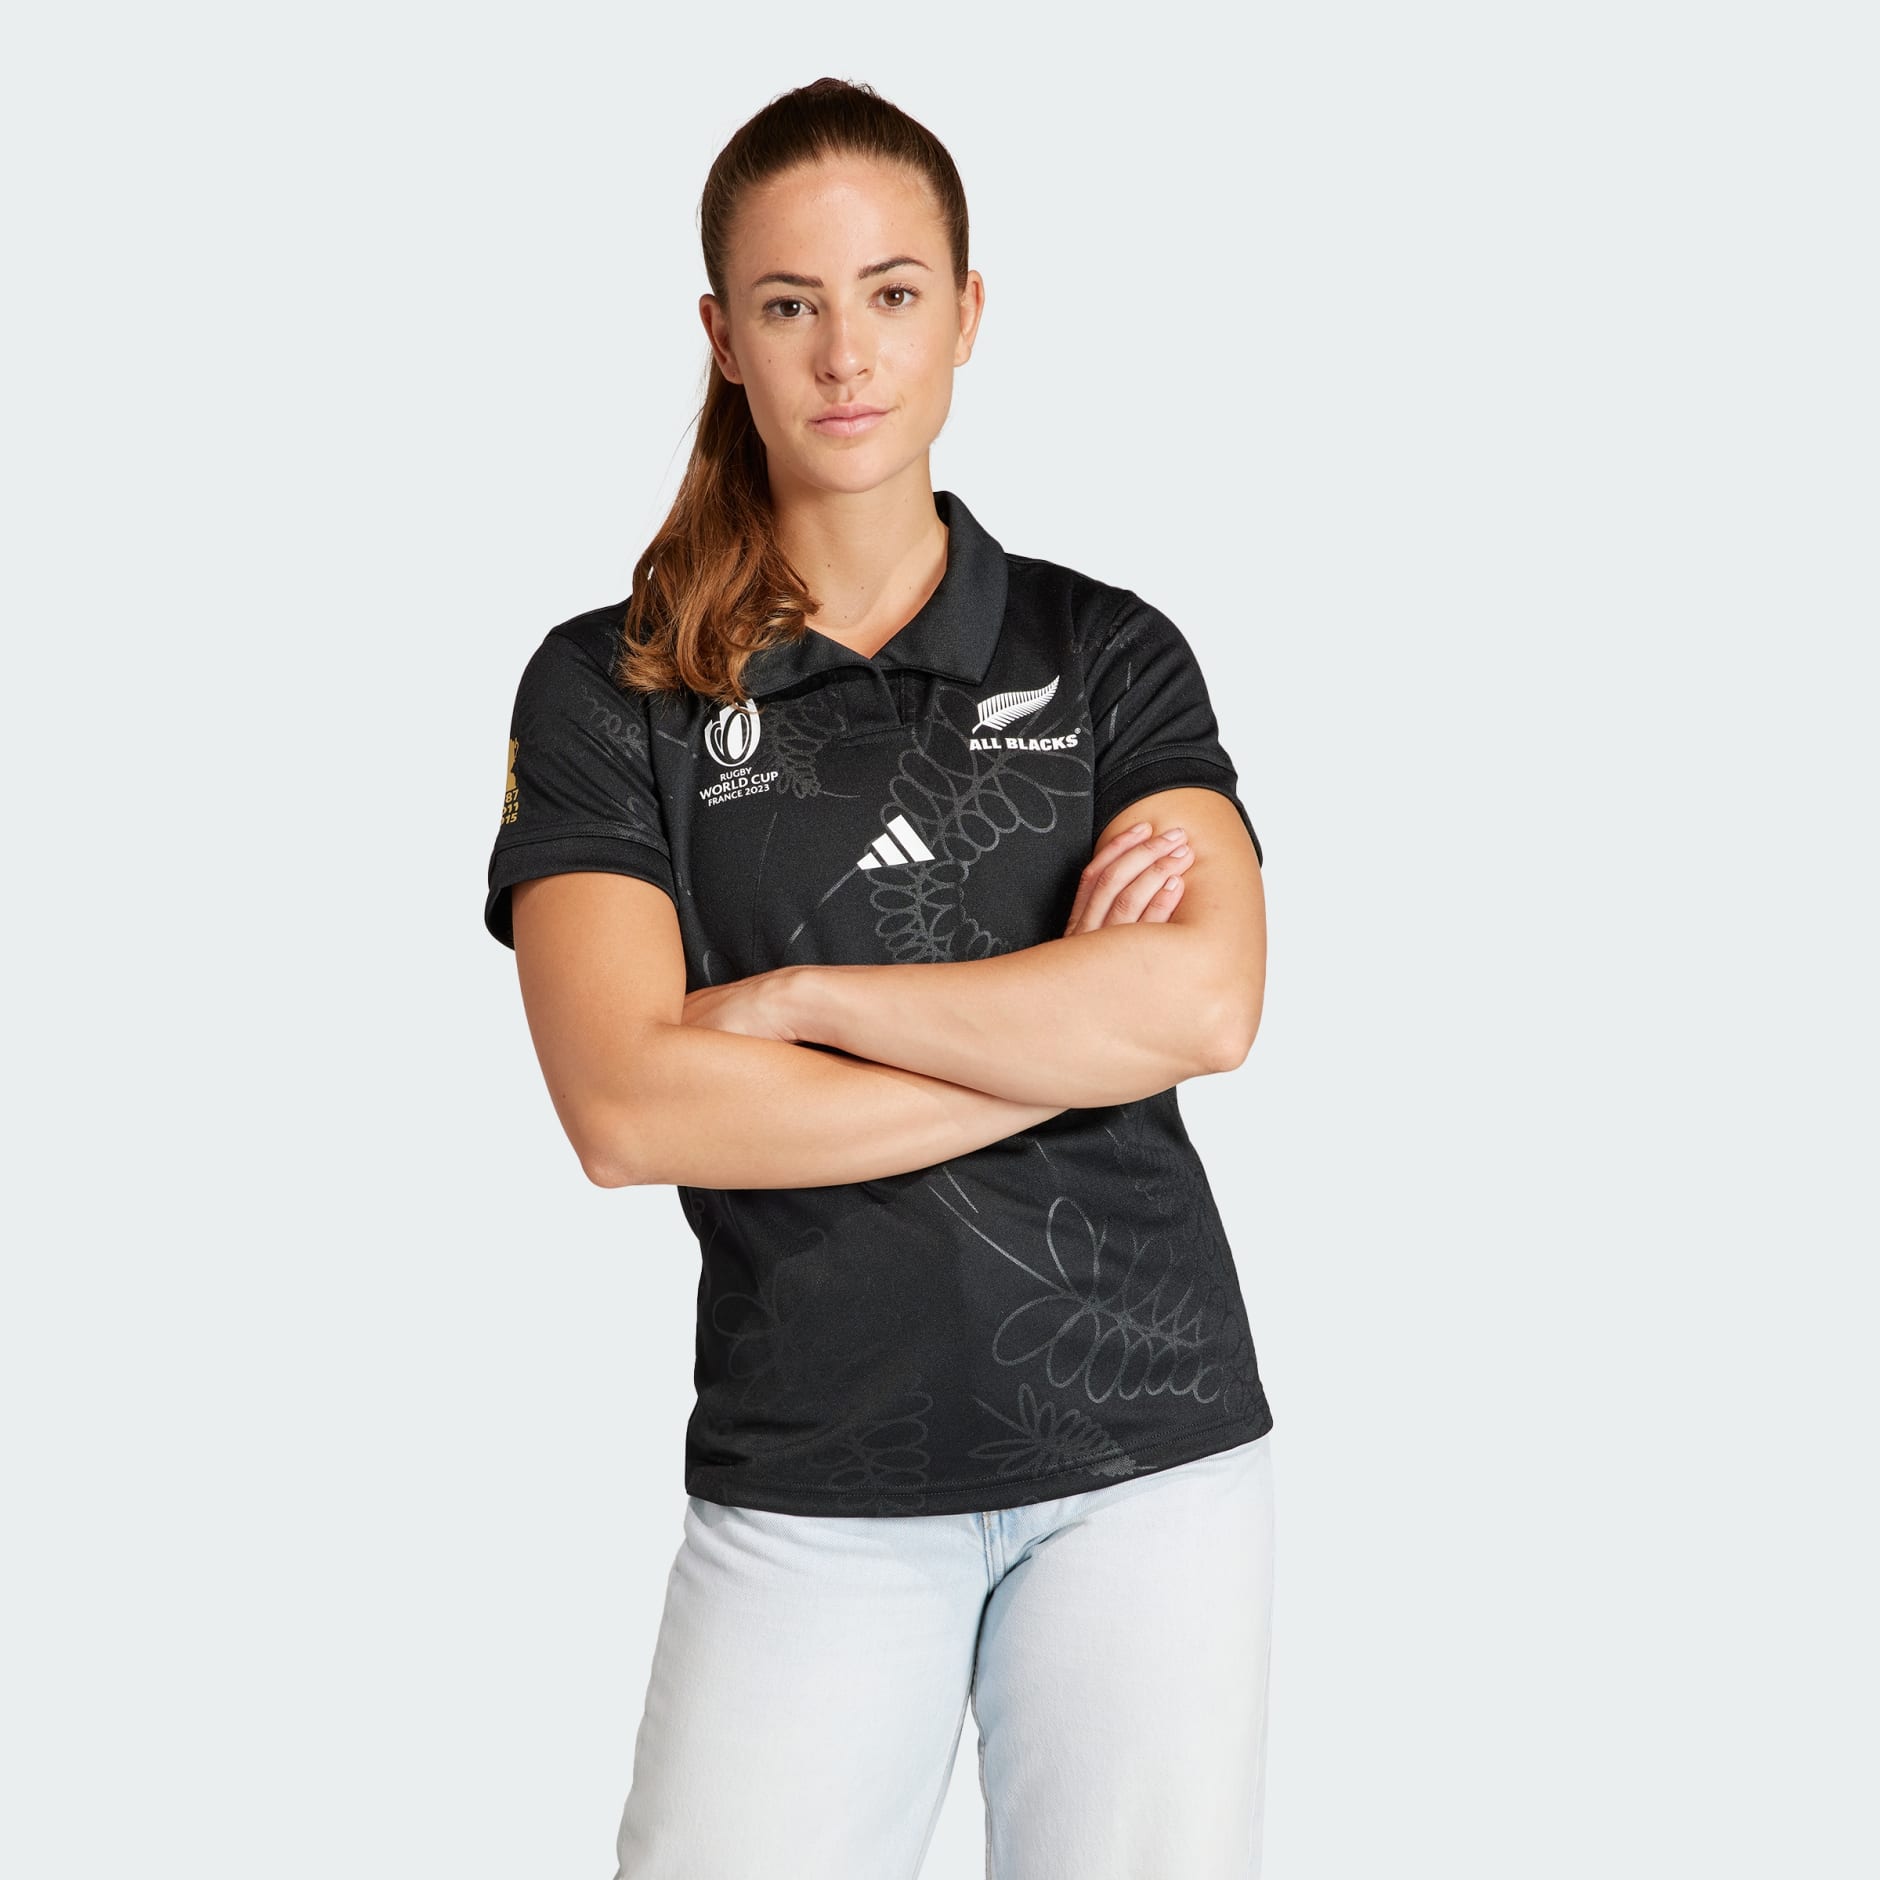 New Zealand All Blacks RWC 23 Home Supporter Jersey by adidas